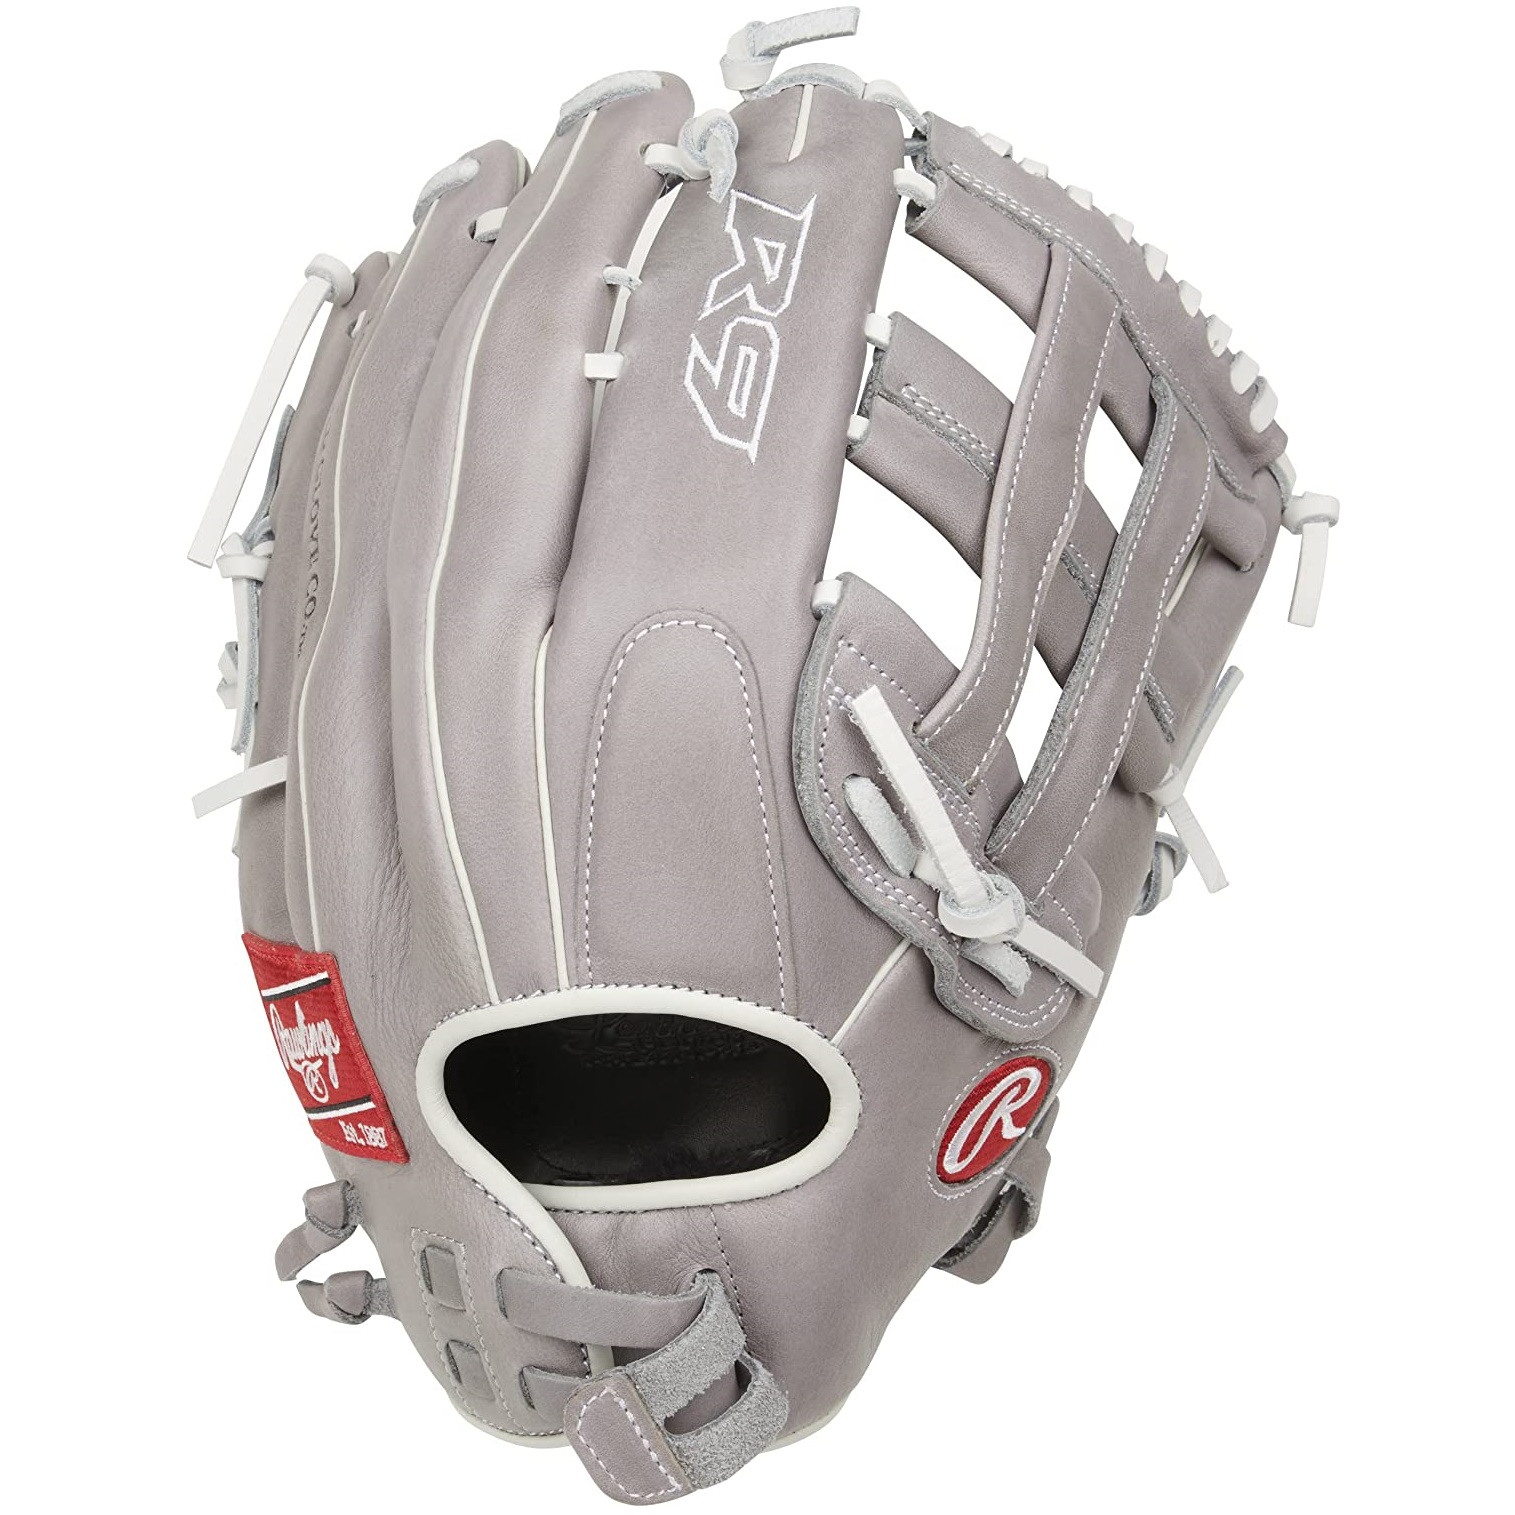 rawlings-r9-fastpitch-softball-glove-13-inch-right-hand-throw R9SB130-6G-RightHandThrow Rawlings  <p><span> <span style=font-size large;>This Rawlings R9 series features soft durable all-leather shells